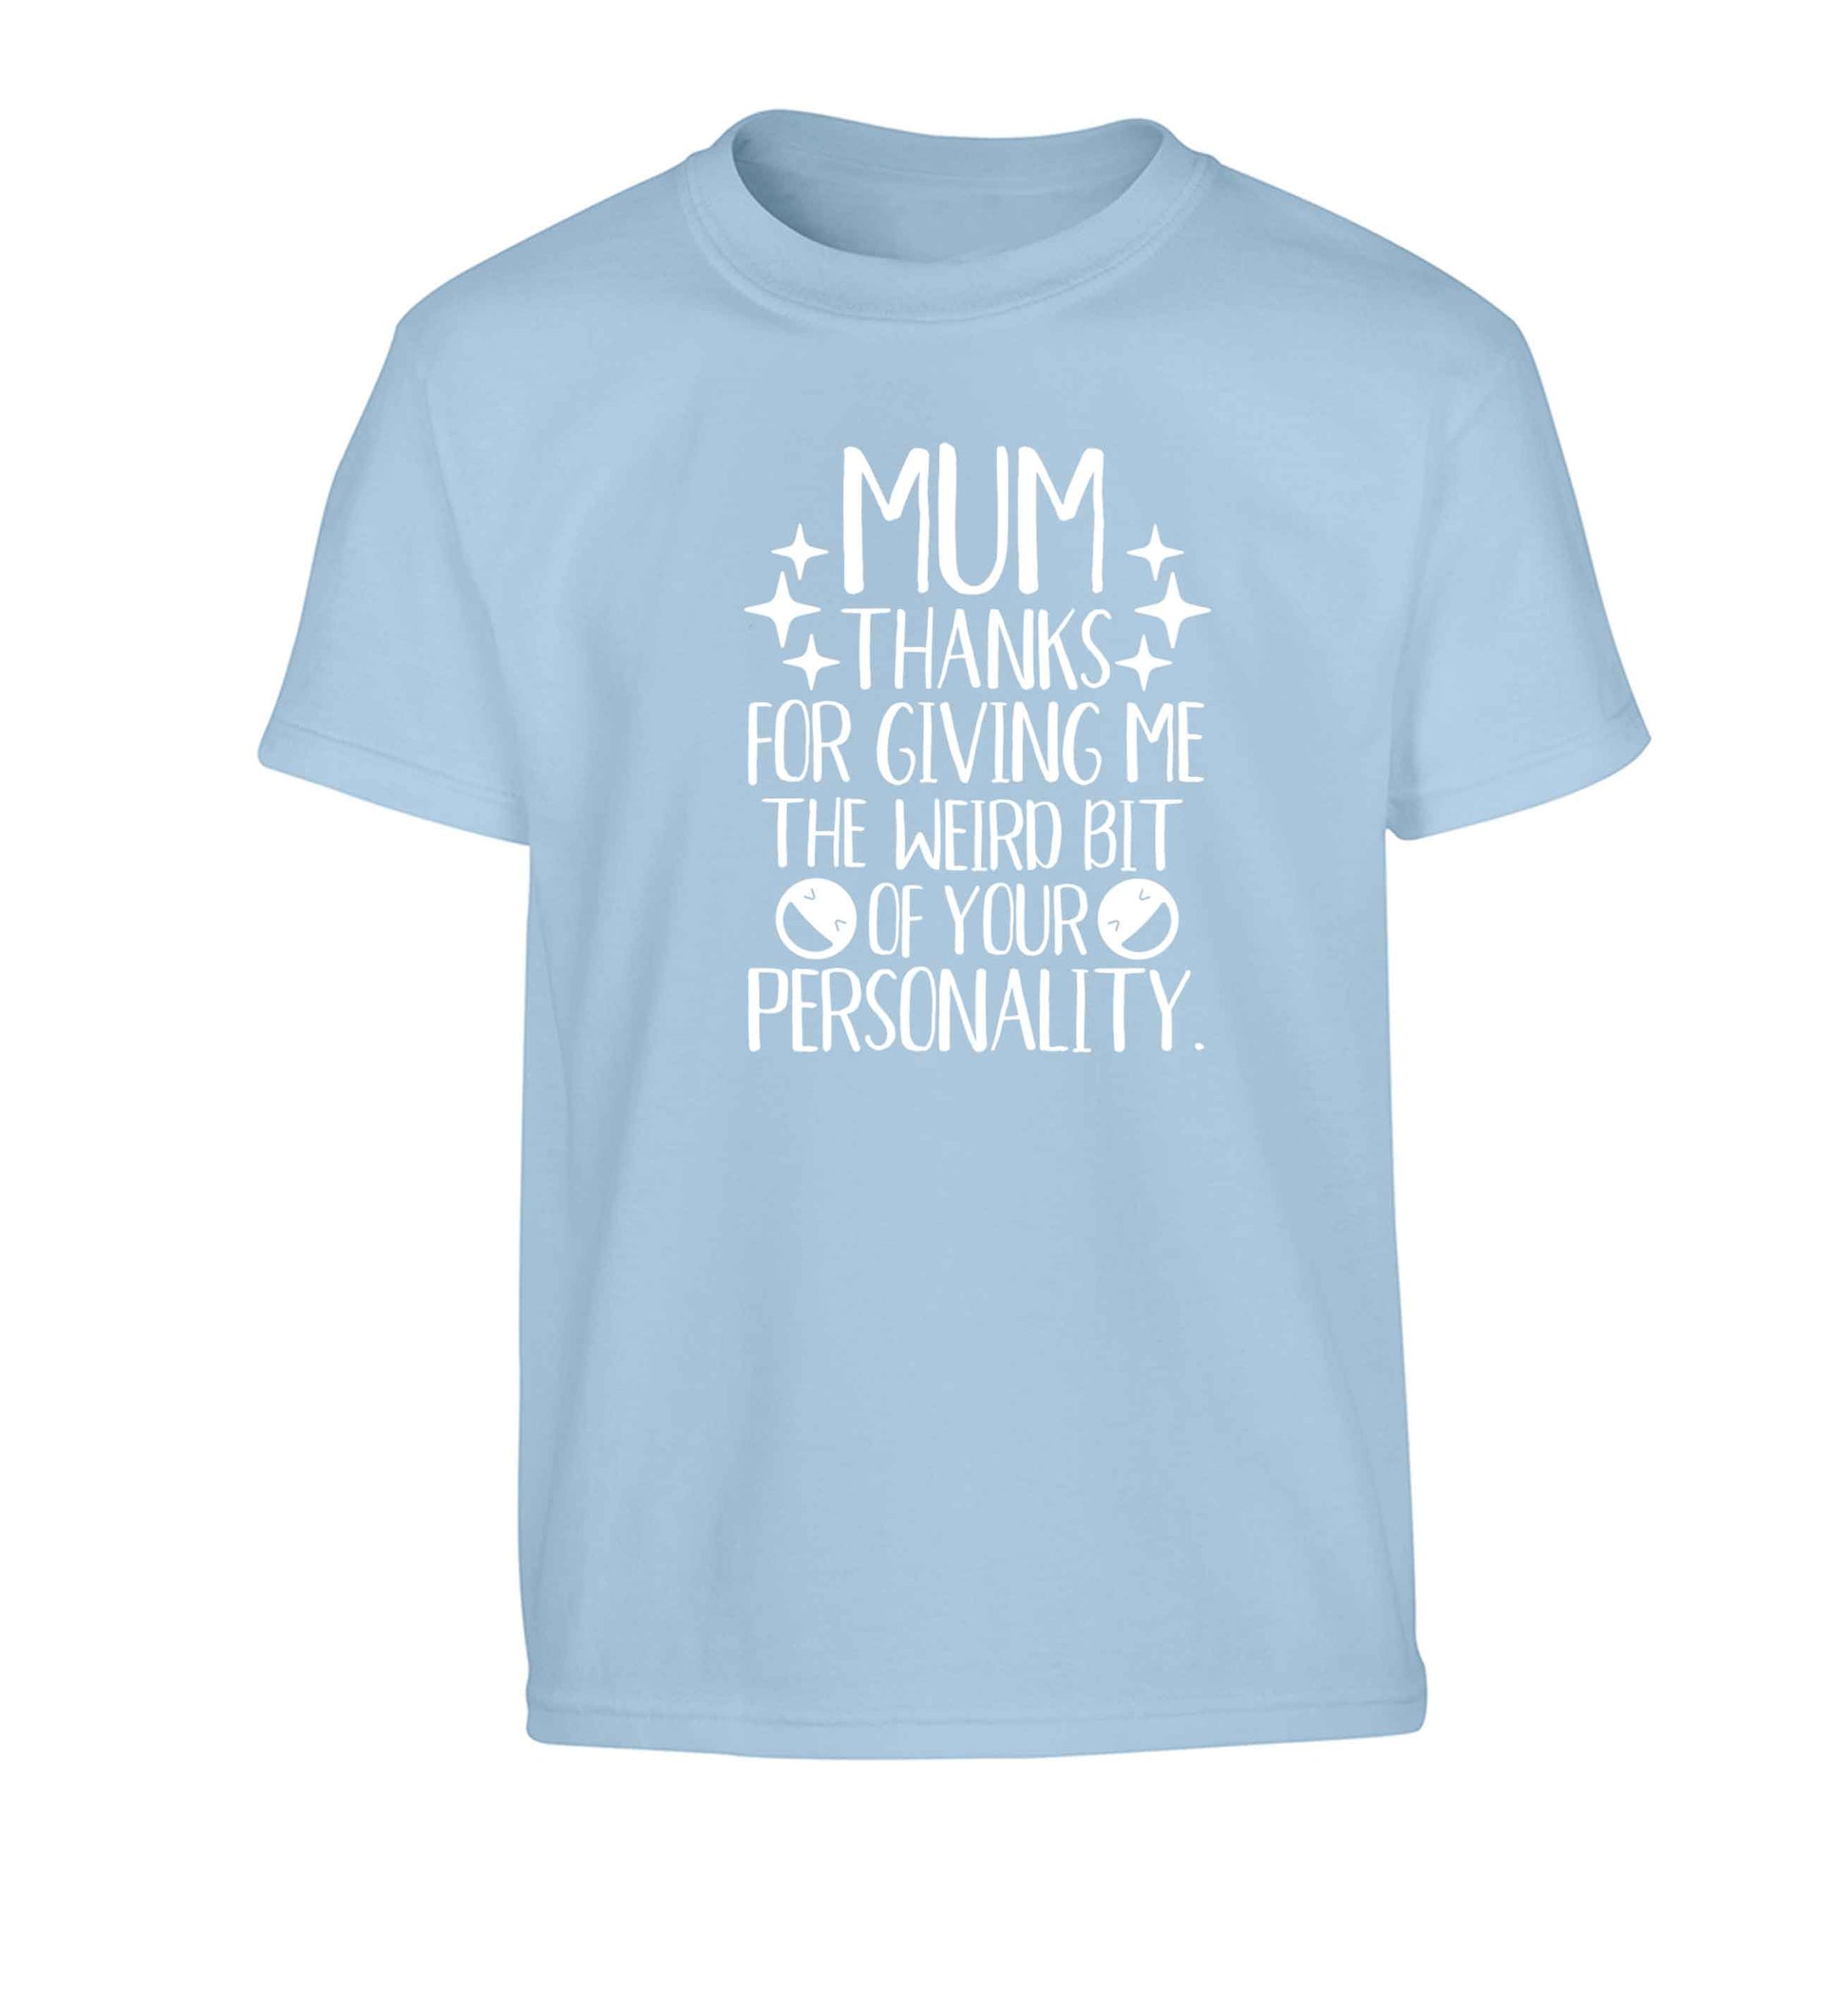 Mum thanks for giving me the weird bit of your personality Children's light blue Tshirt 12-13 Years